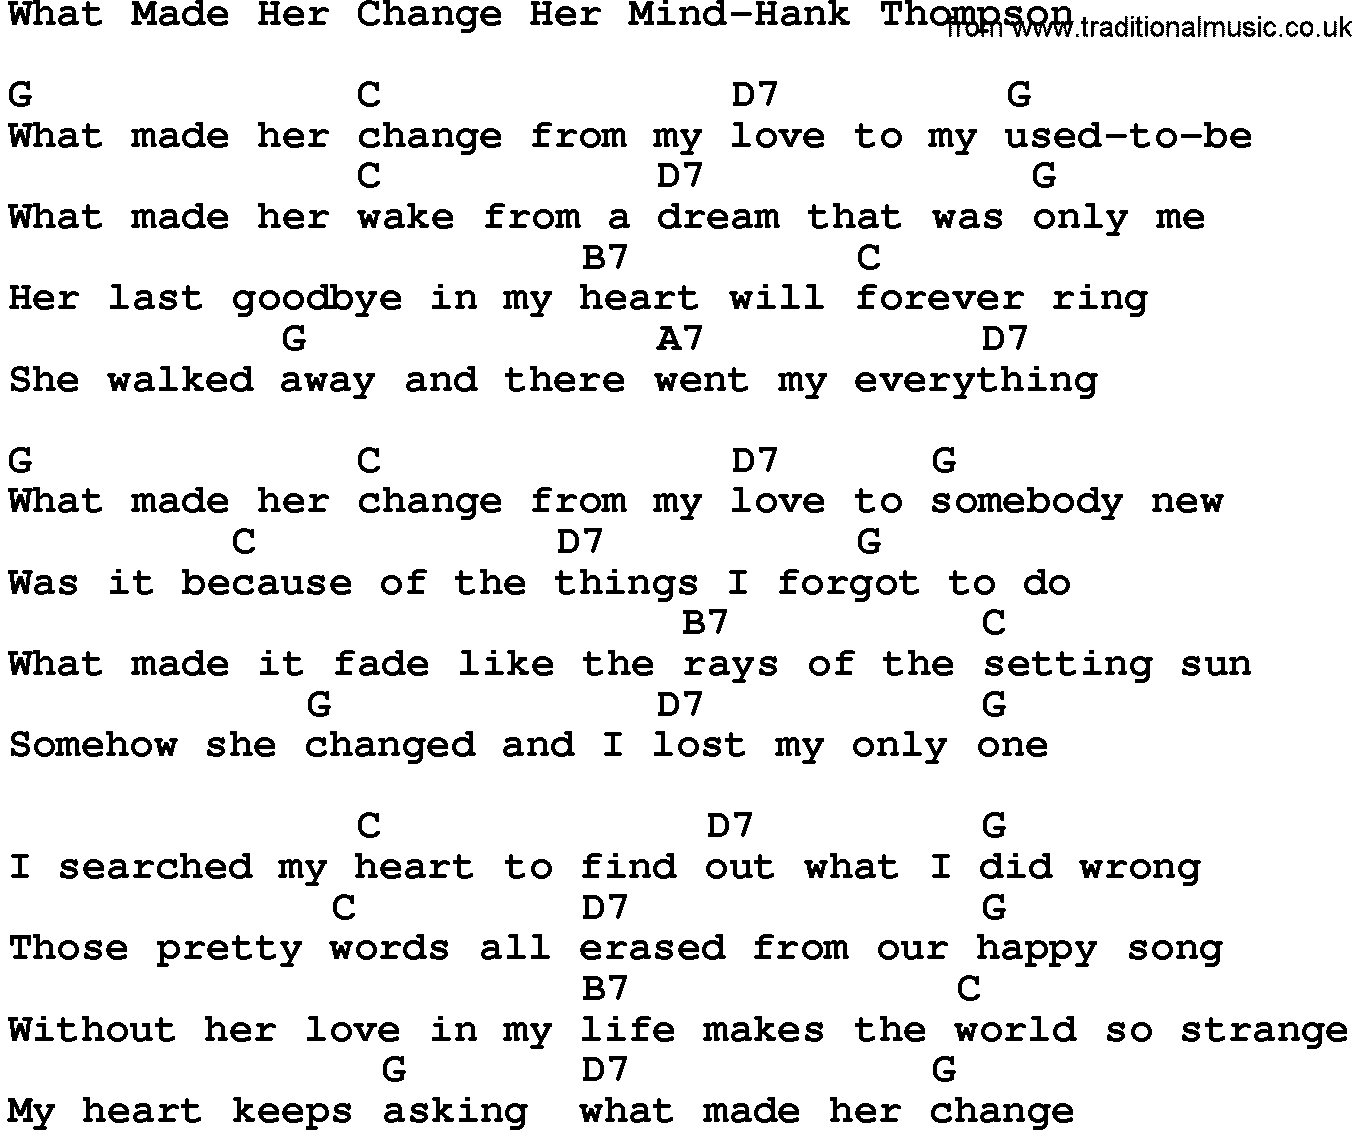 Country music song: What Made Her Change Her Mind-Hank Thompson lyrics and chords